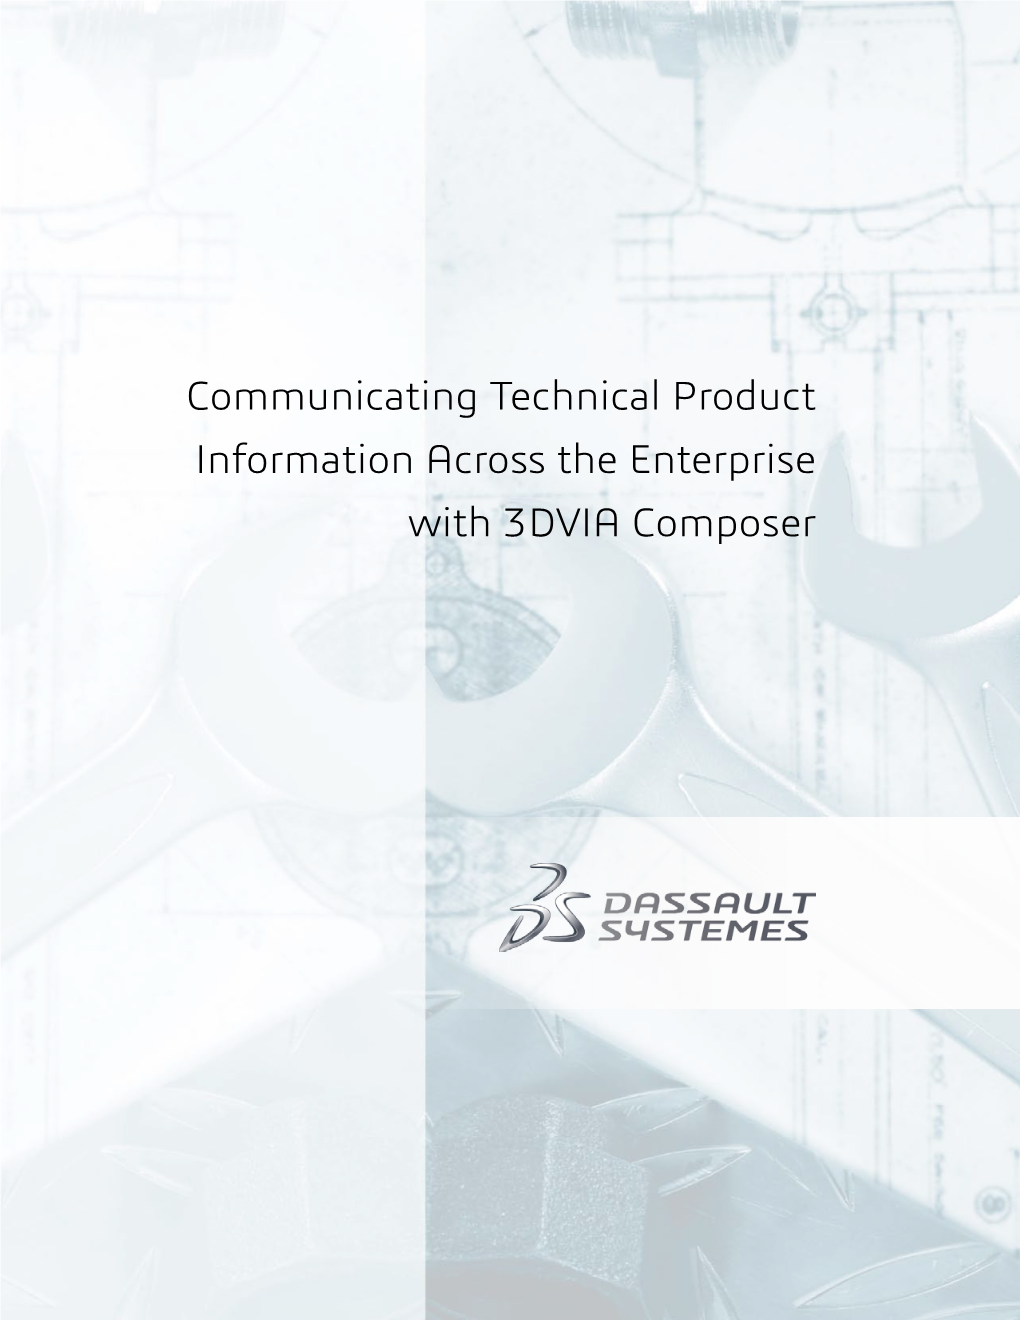 Communicating Technical Product Information Across the Enterprise with 3DVIA Composer Executive Summary